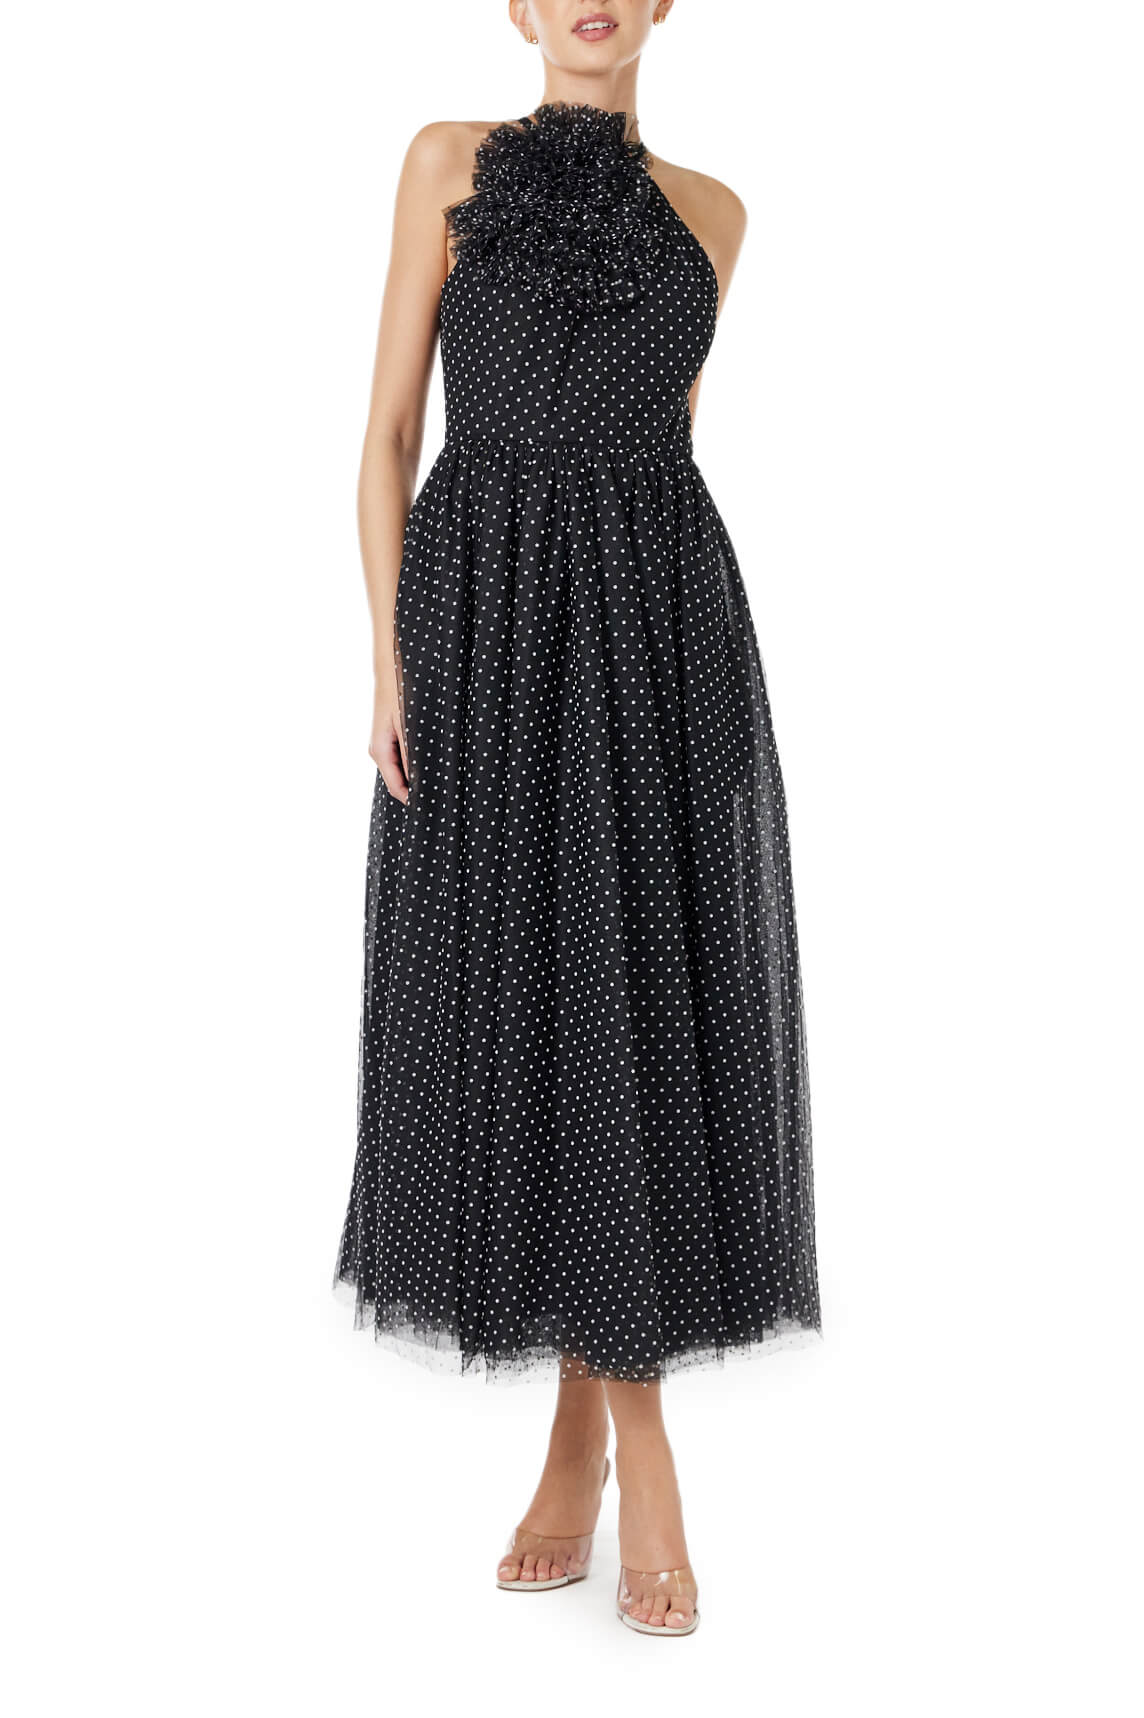 ML Monique Lhuillier midi length halter dress with puff accent at neckline in black and white dotted tulle fabric.